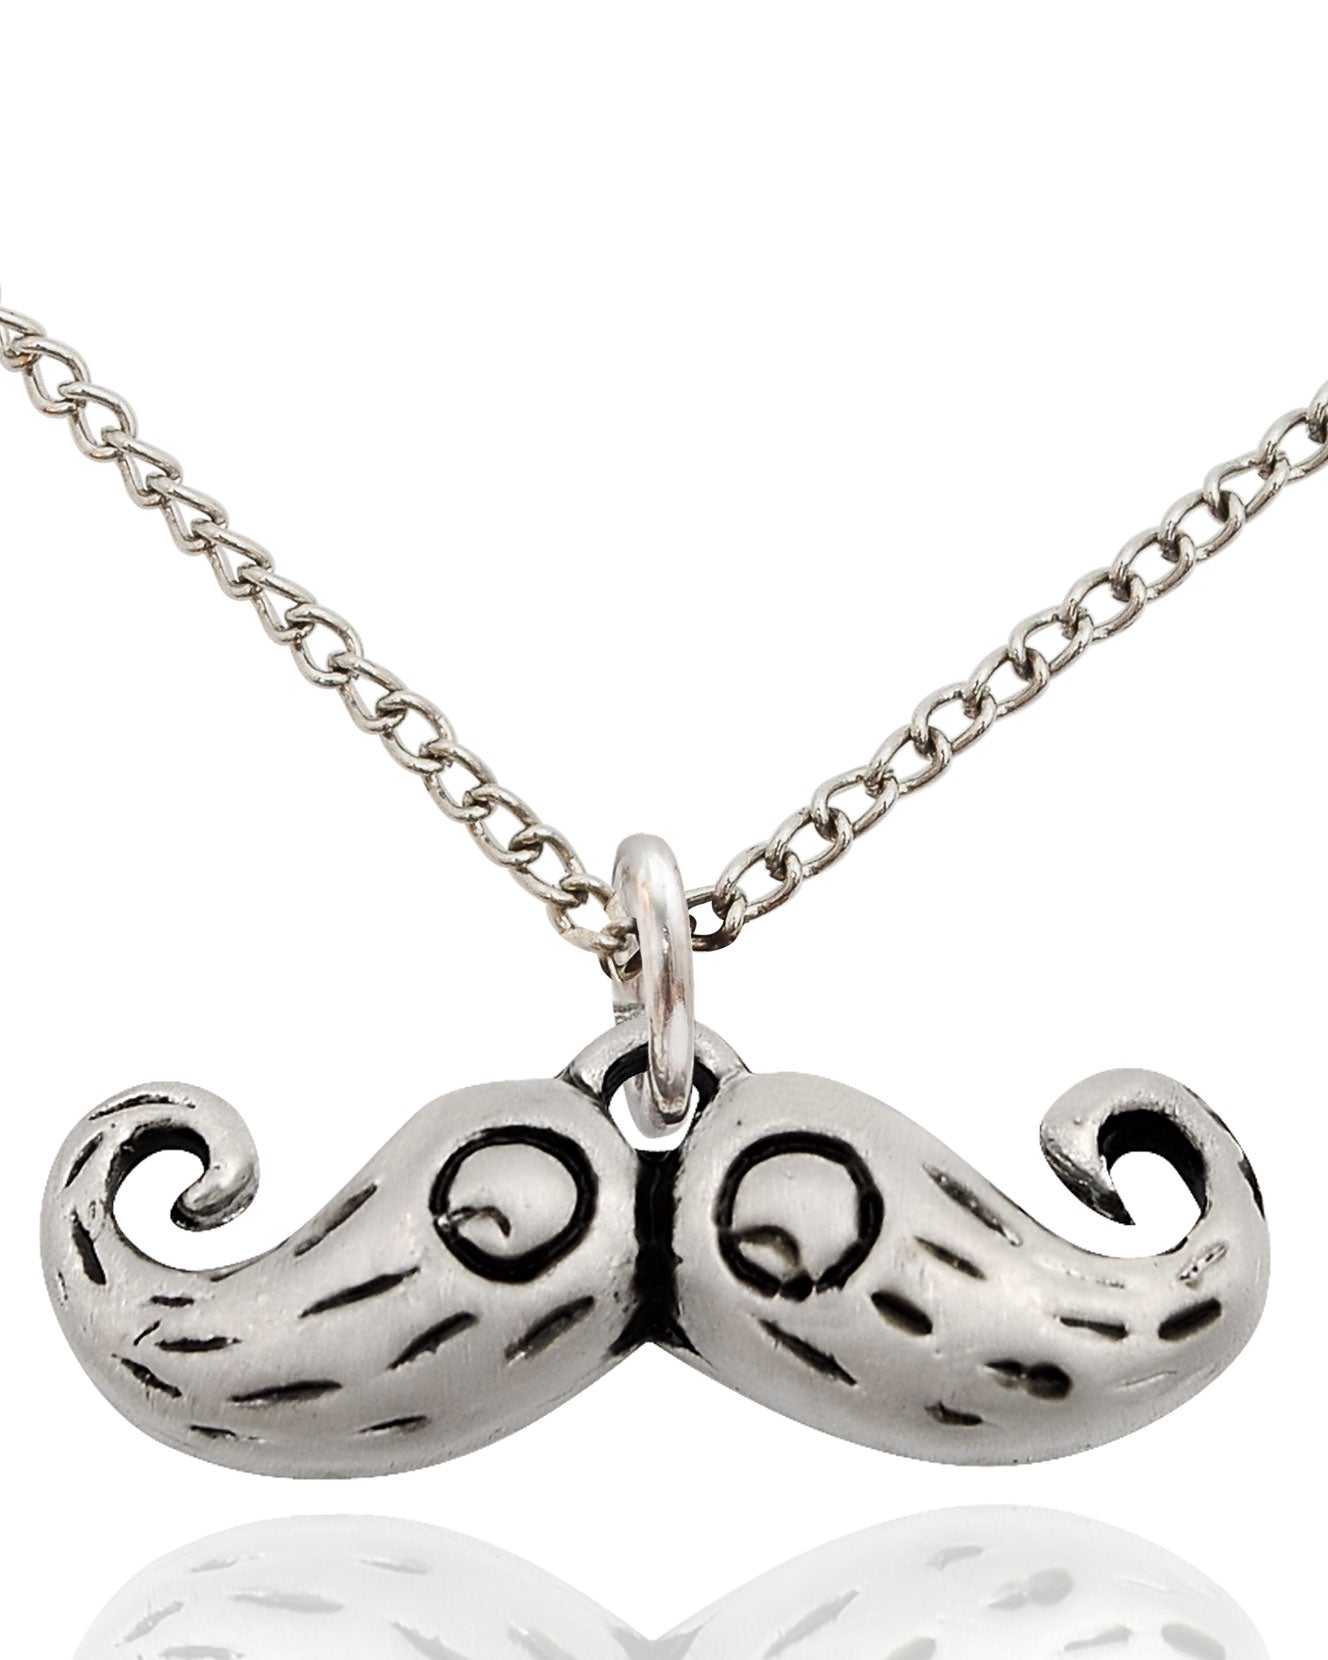 Cute Moustache Silver Pewter Gold Brass Charm Necklace Pendant Jewelry